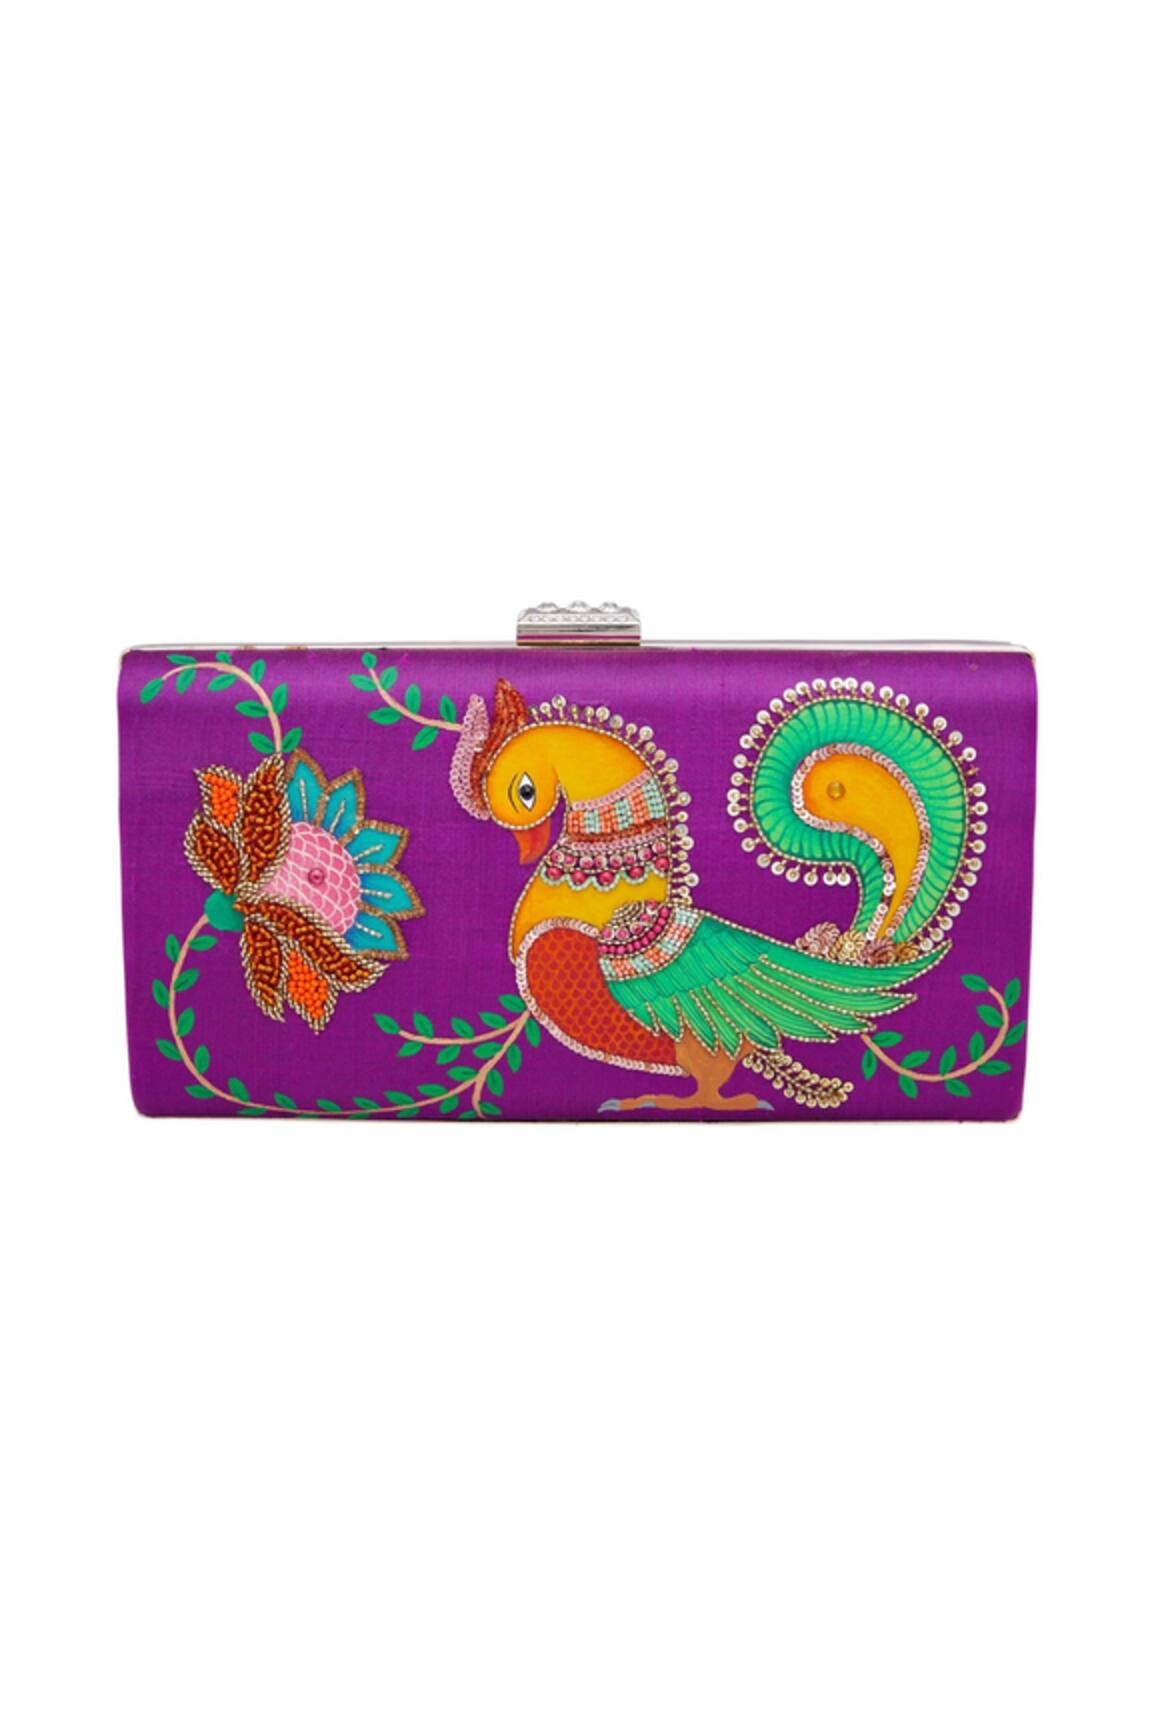 Crazy Palette Embroidered & hand painted clutch